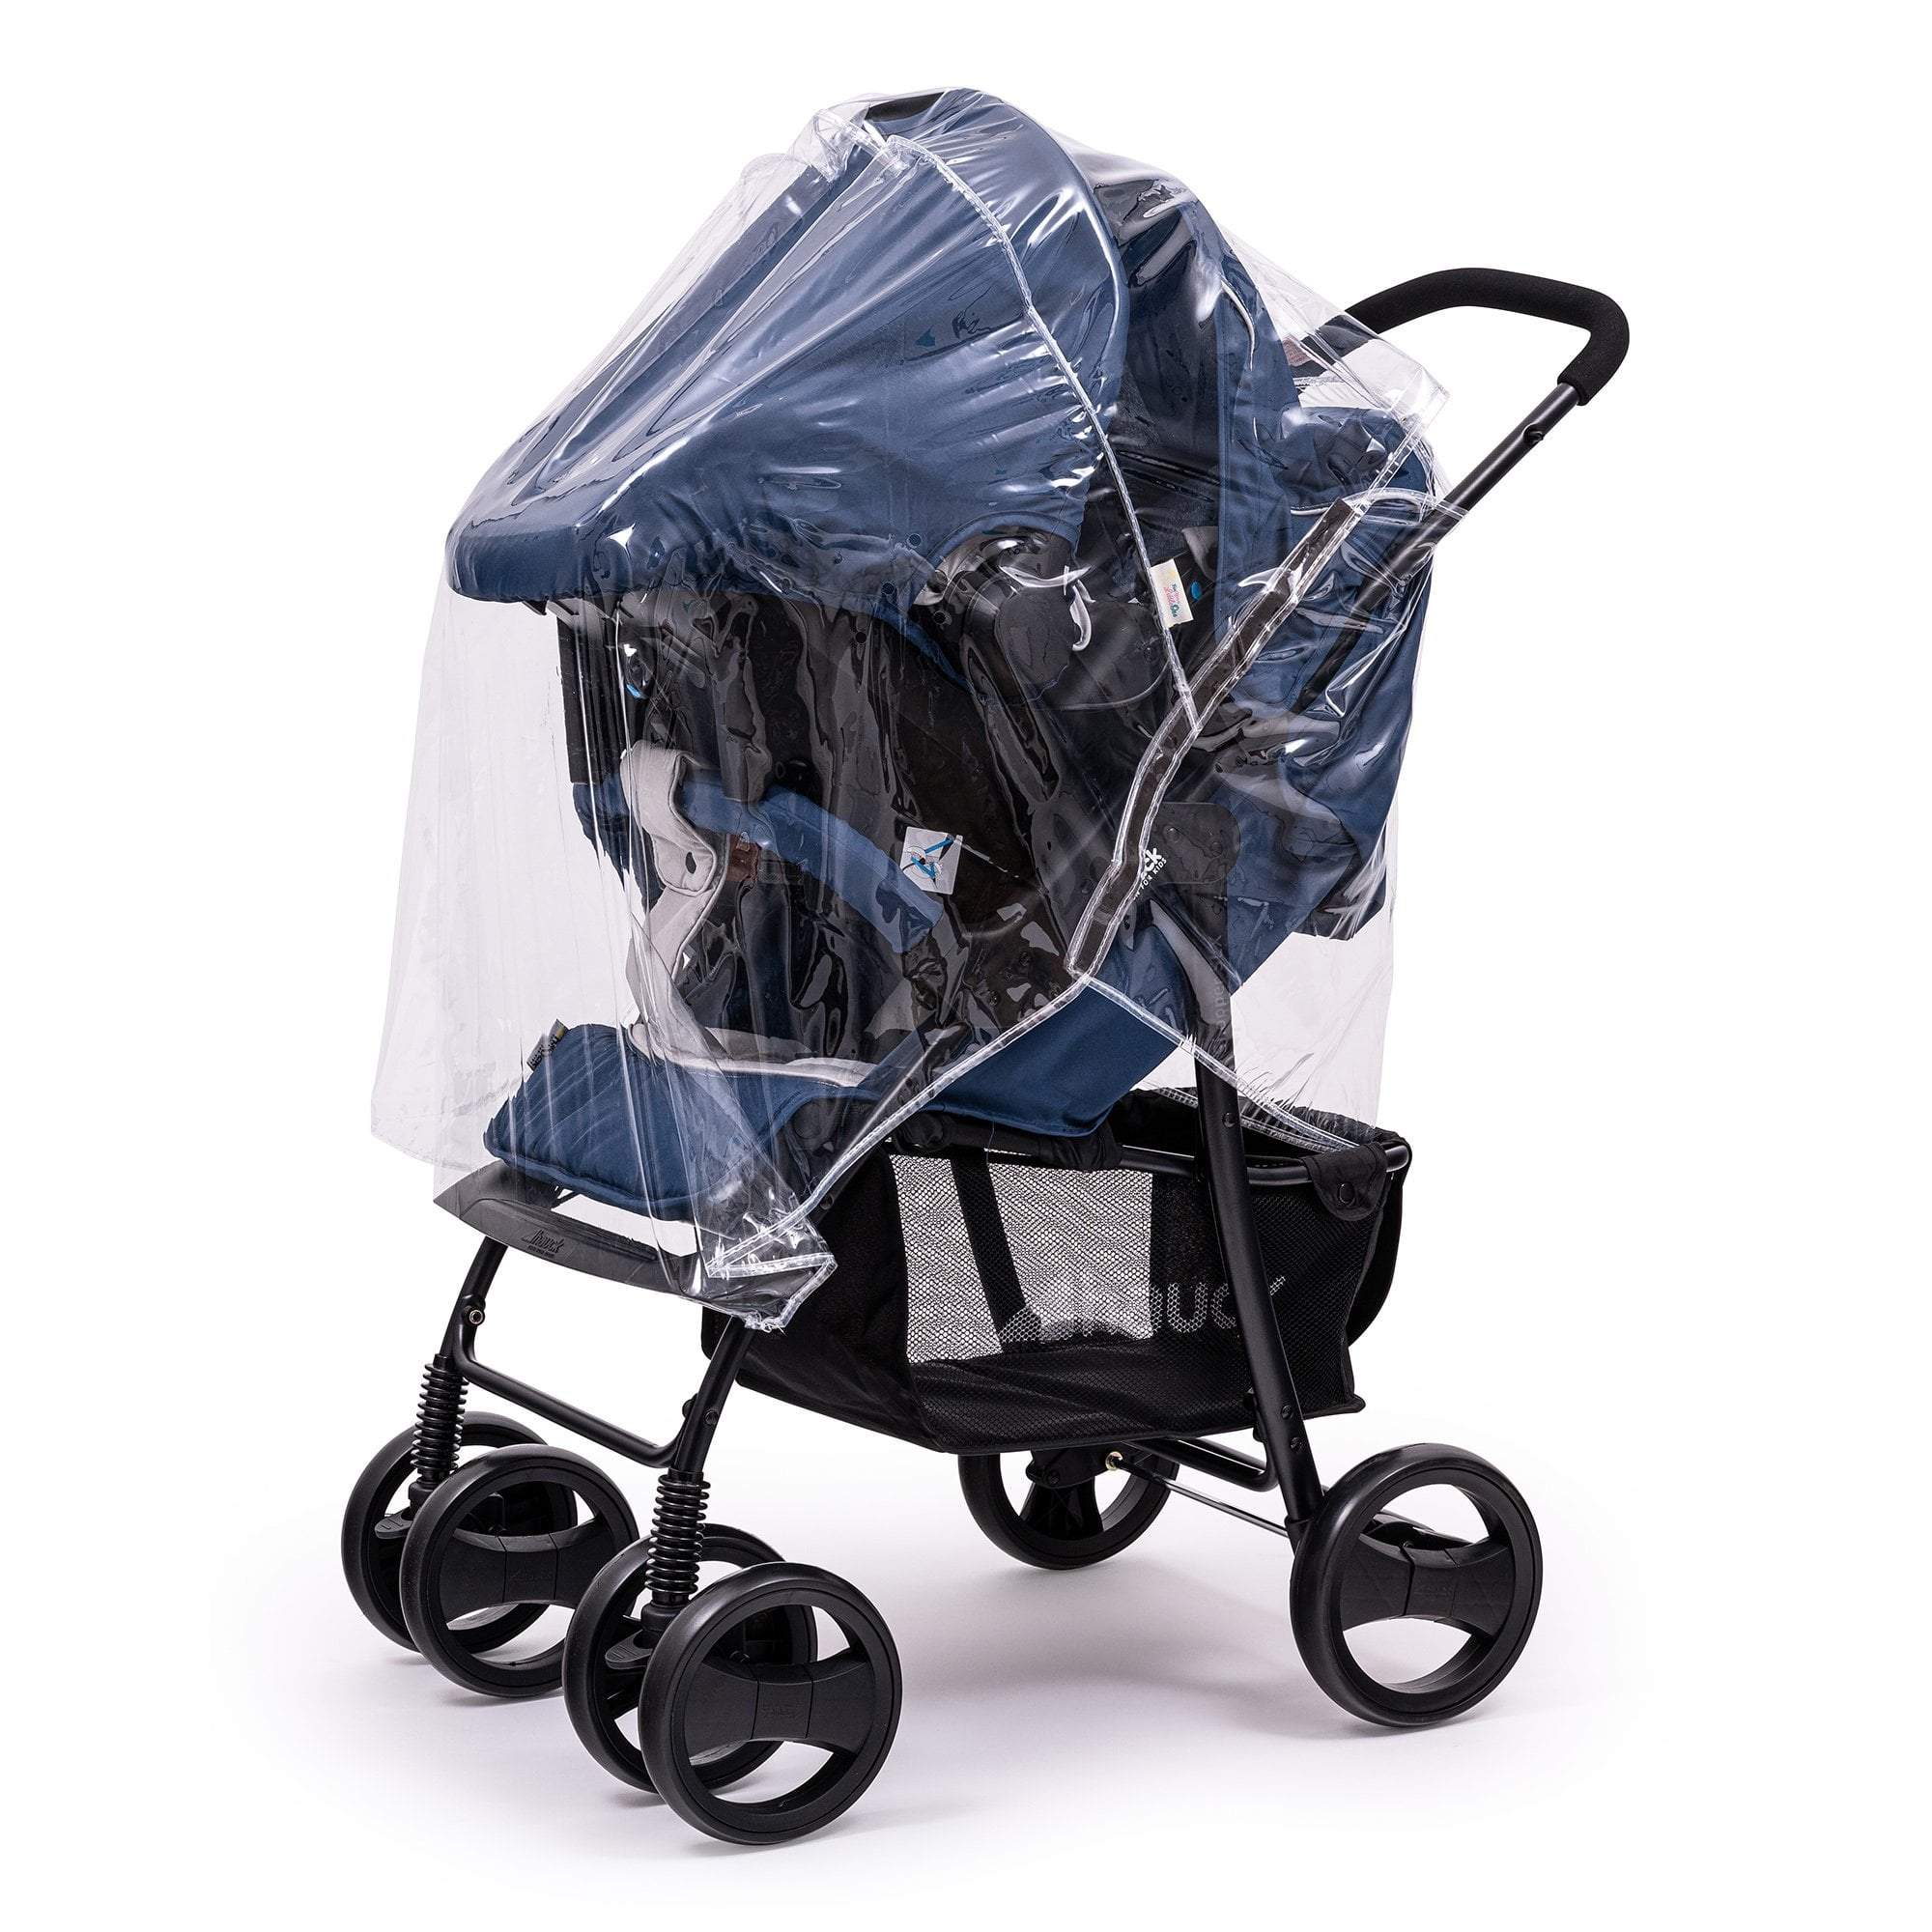 Travel System Raincover Compatible with Bugaboo - Fits All Models - For Your Little One